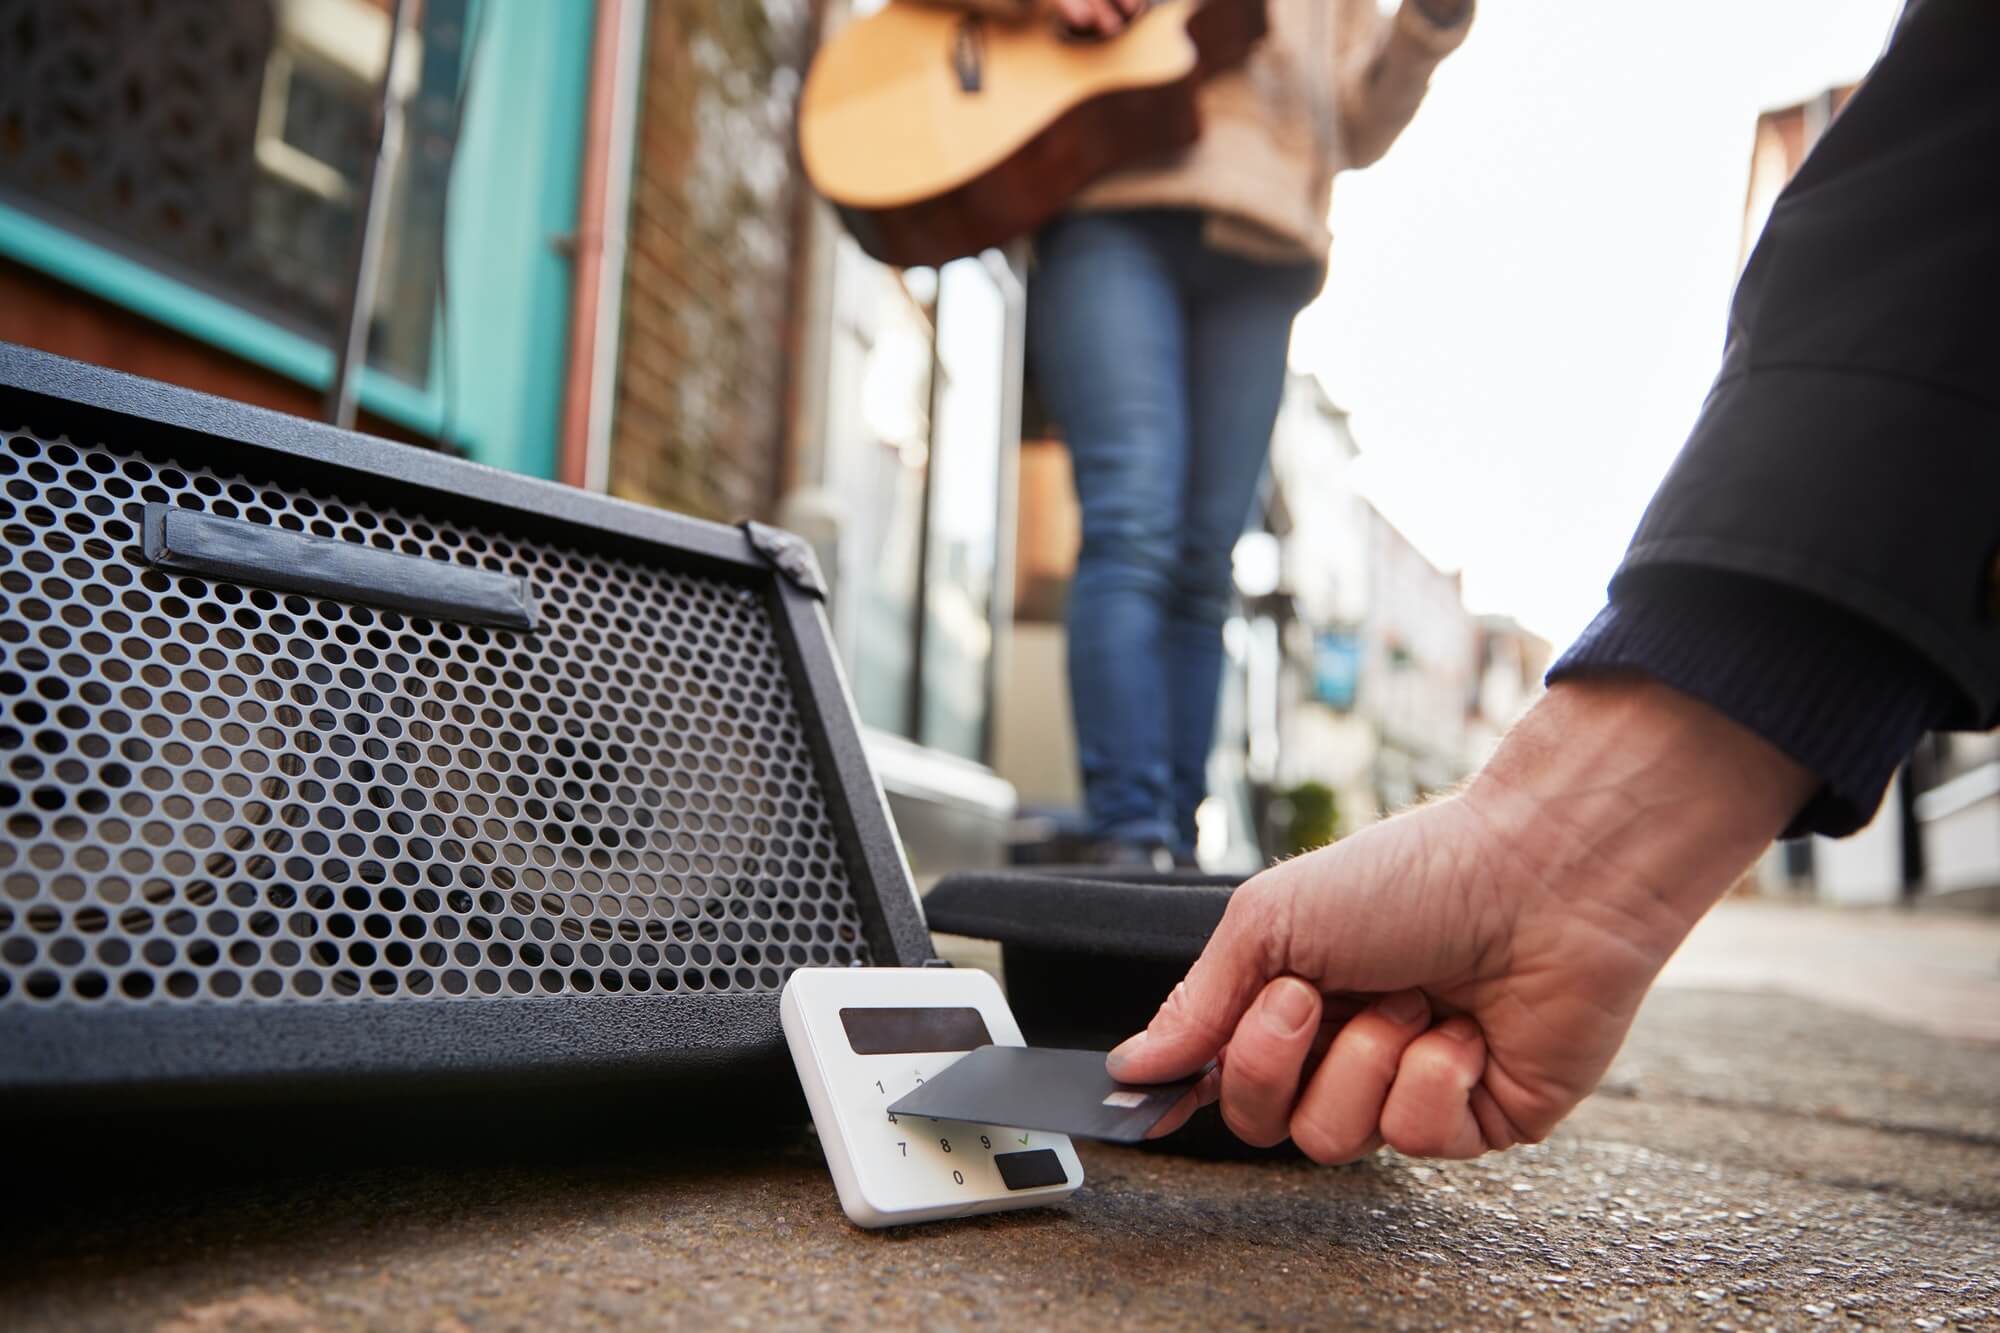 Close Up Of Person Using Contactless Payment Machine At Feet Of Female Musician Busking In Street